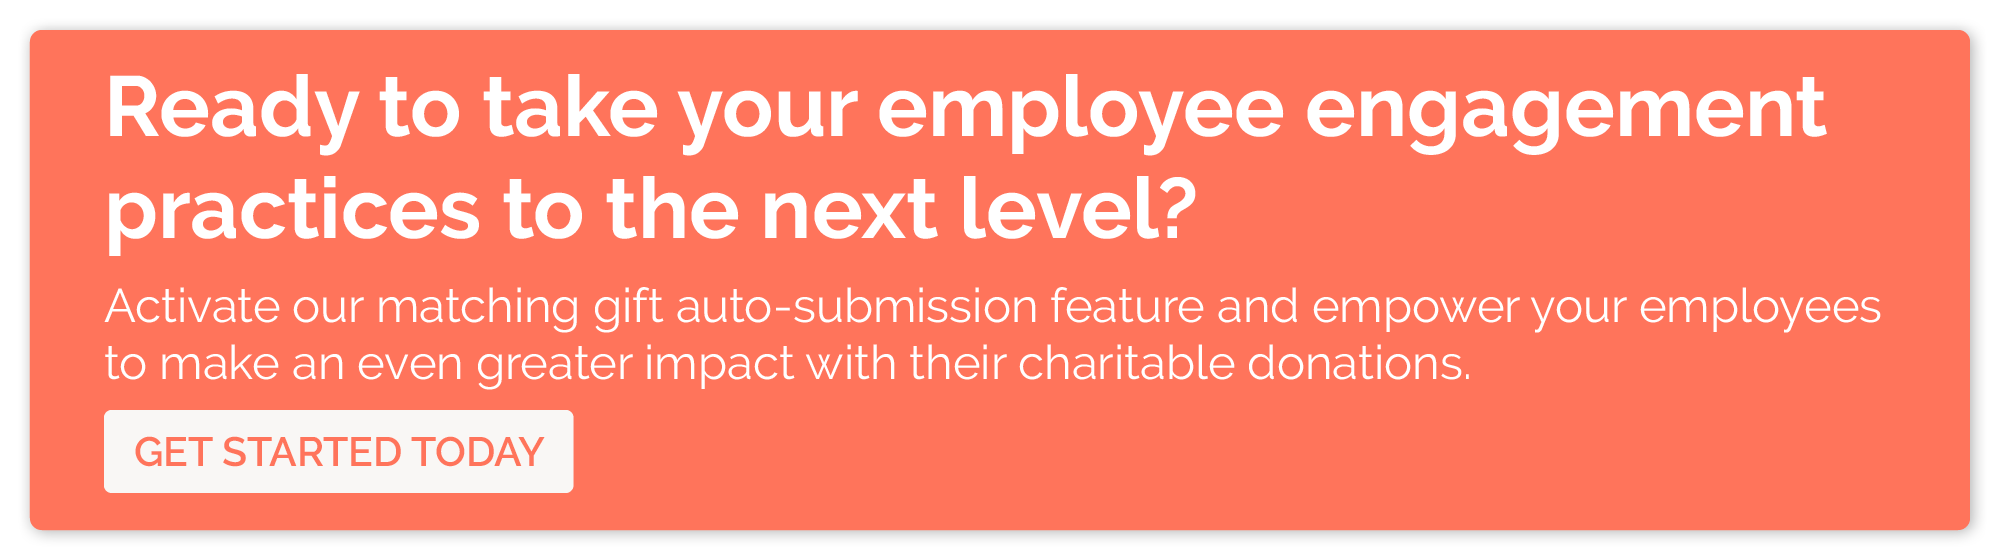 Ready to take your employee engagement practices to the next level? Activate our matching gift auto-submission feature and empower your employees to make an even greater impact with their charitable donations.